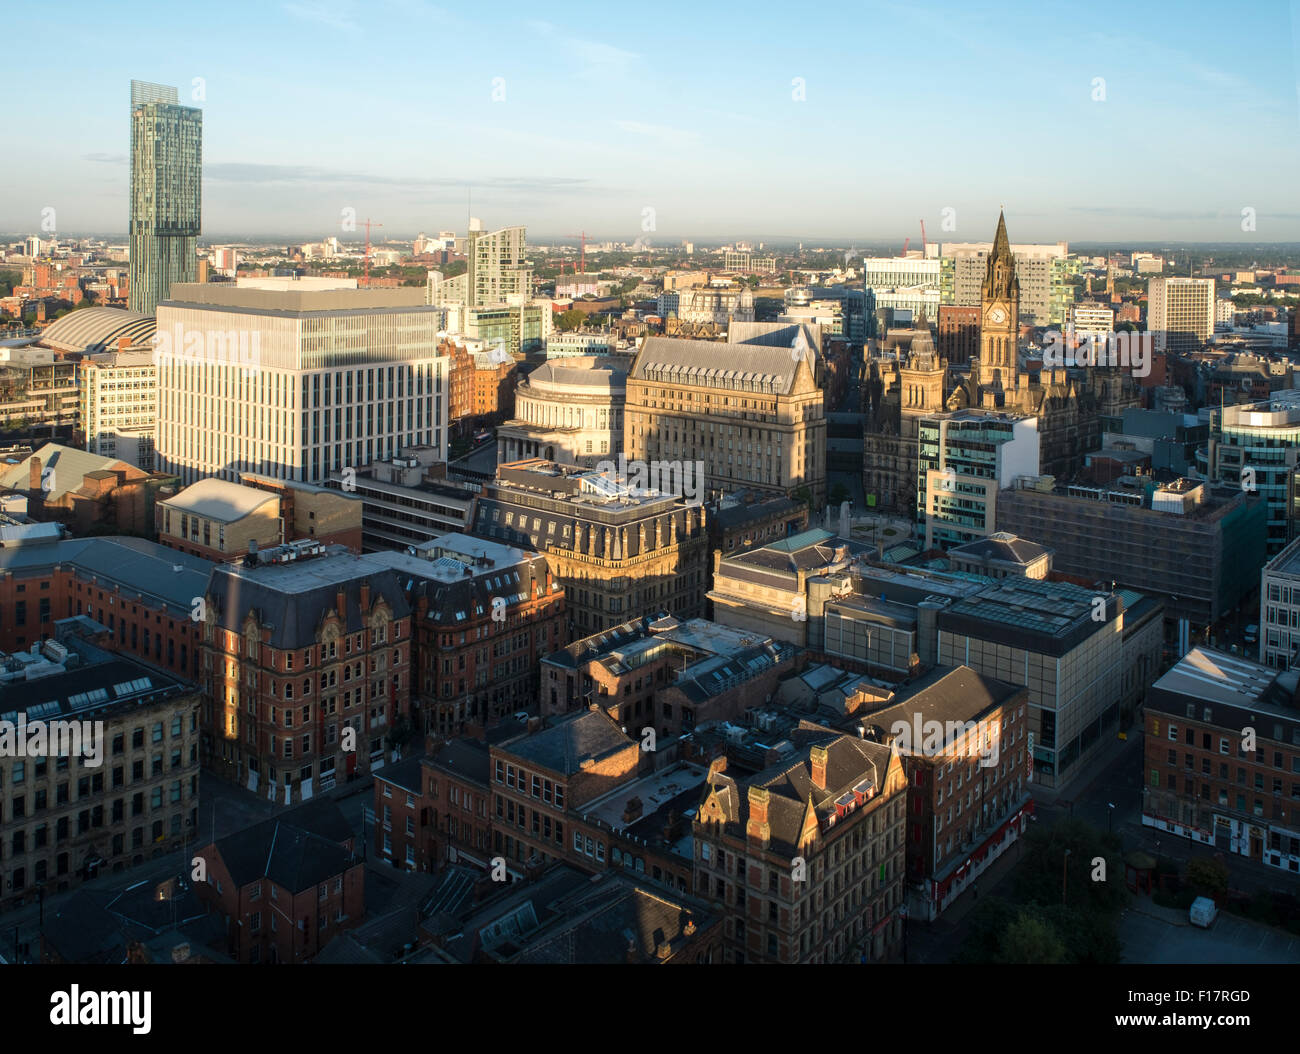 High viewpoint view over Manchester City Centre Stock Photo